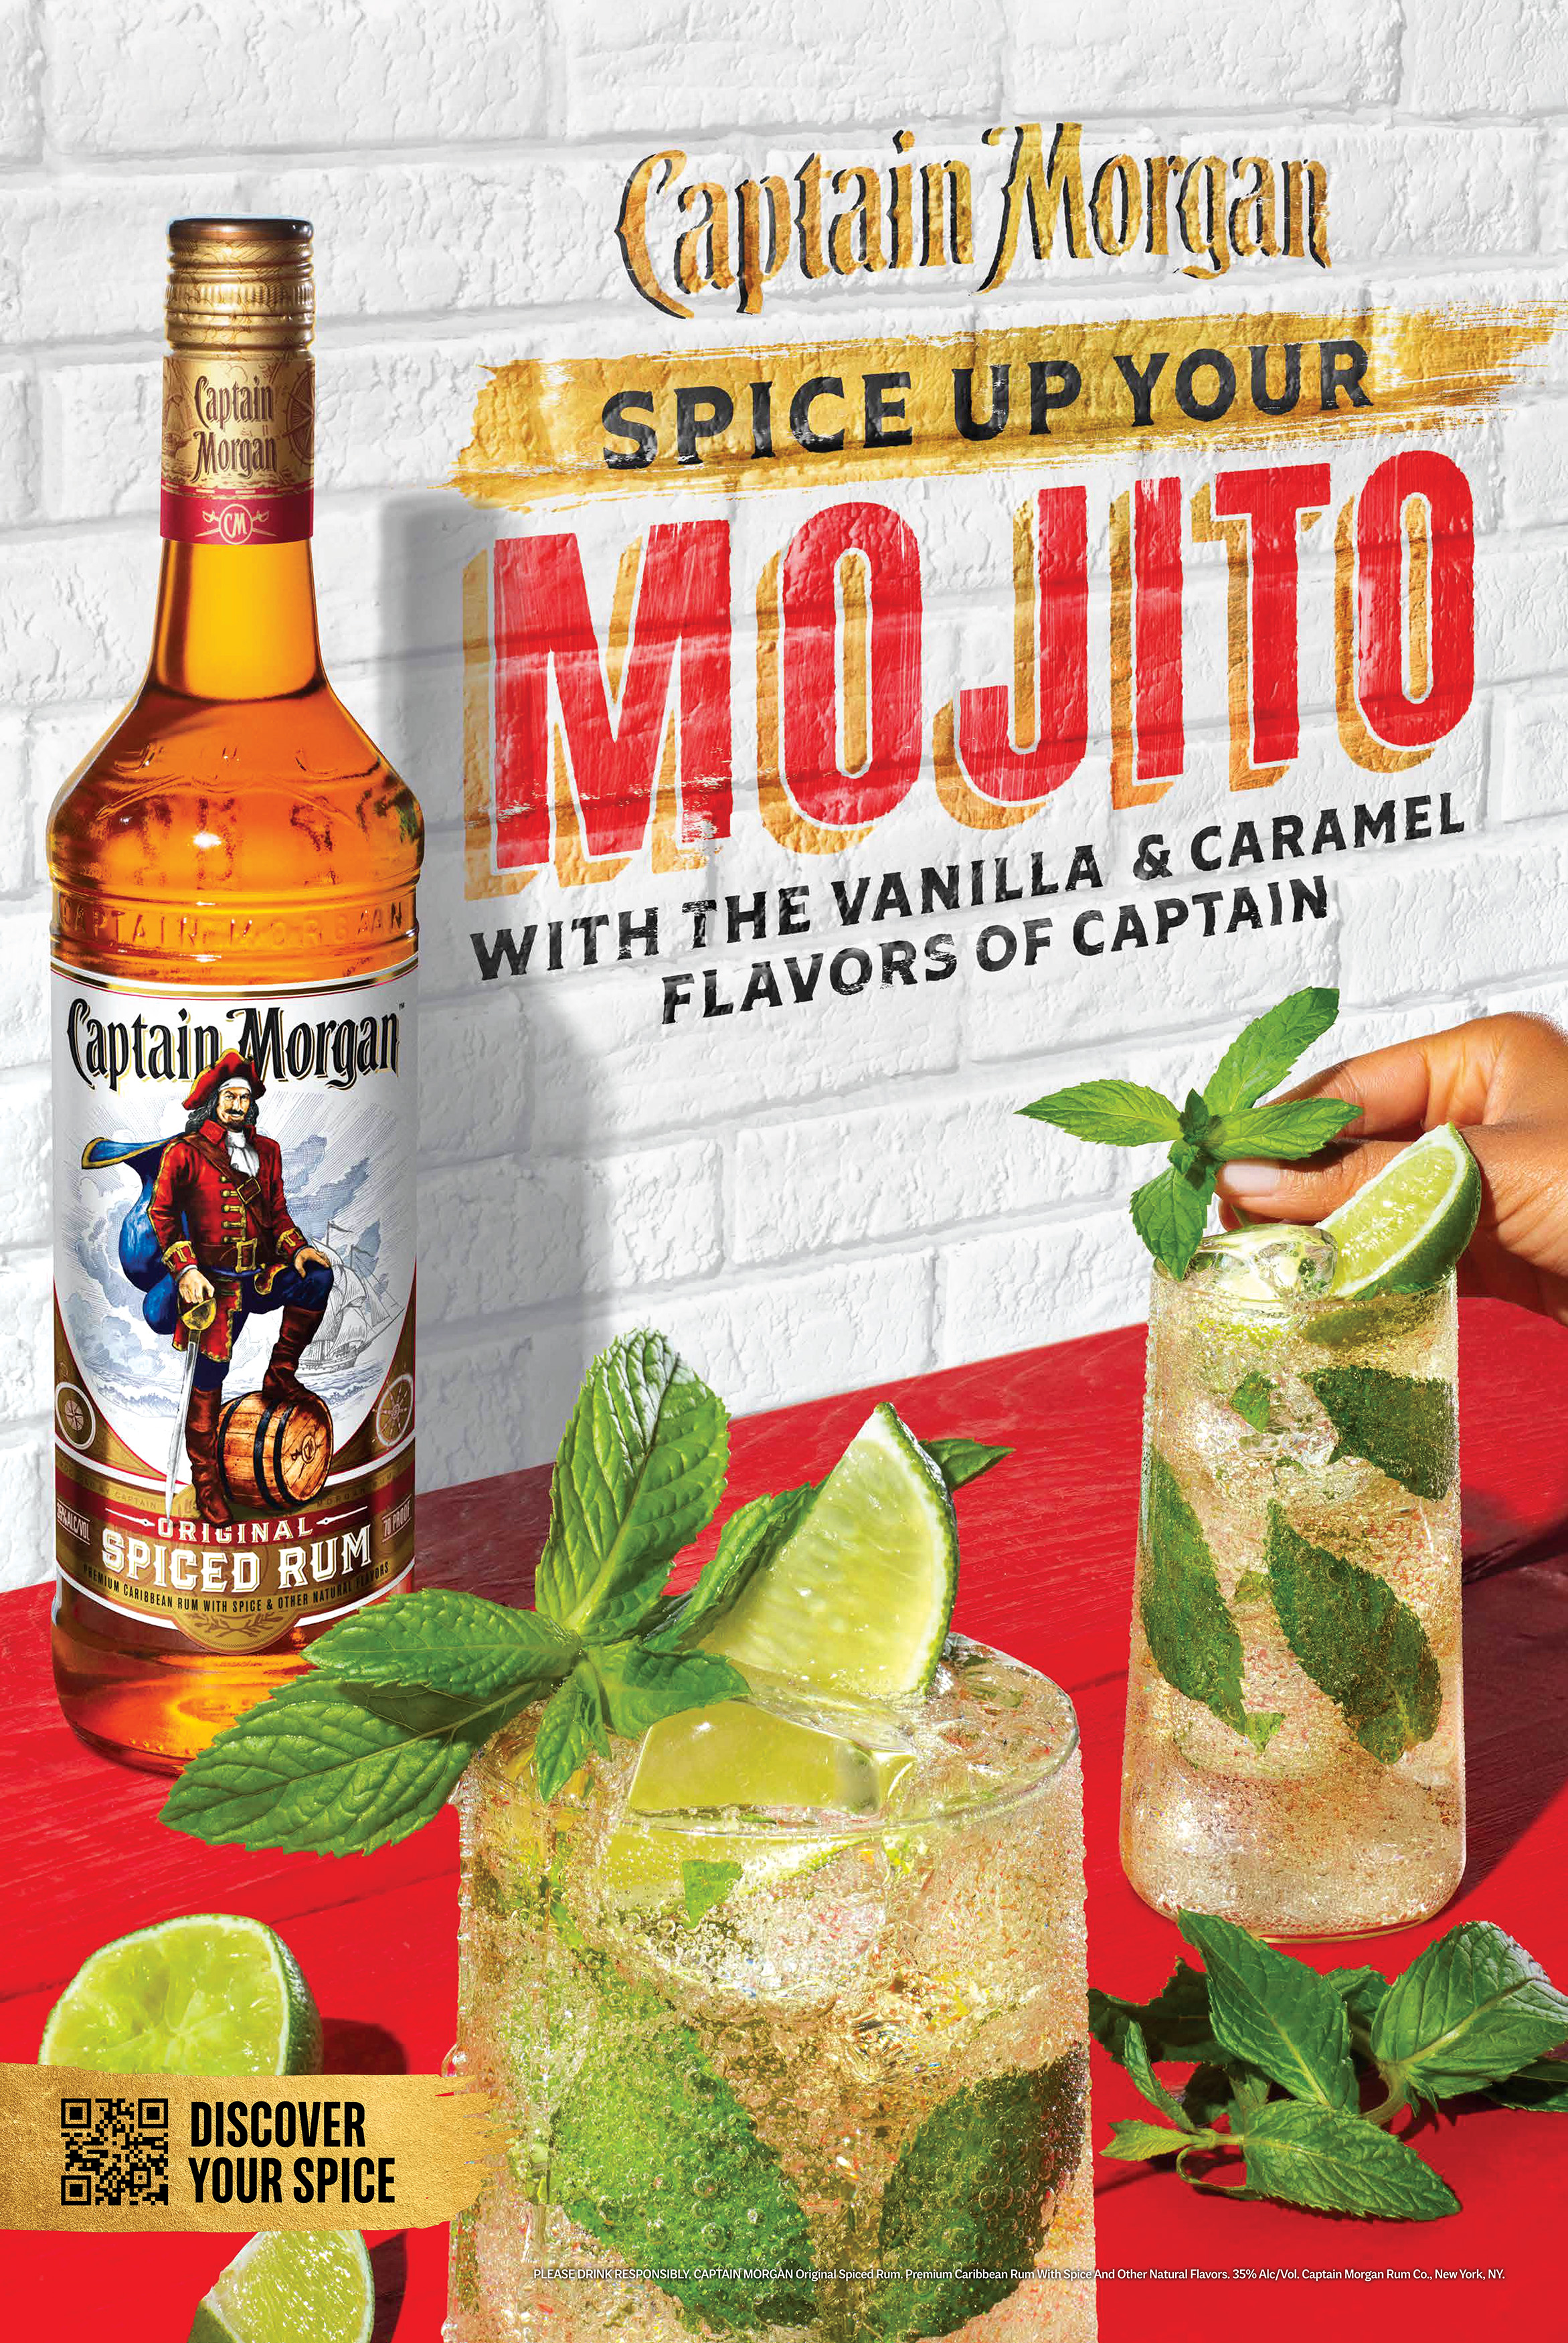 cocktails mojito captain morgan rum Johanna Brannan Lowe Food and Prop Stylist | packaging London